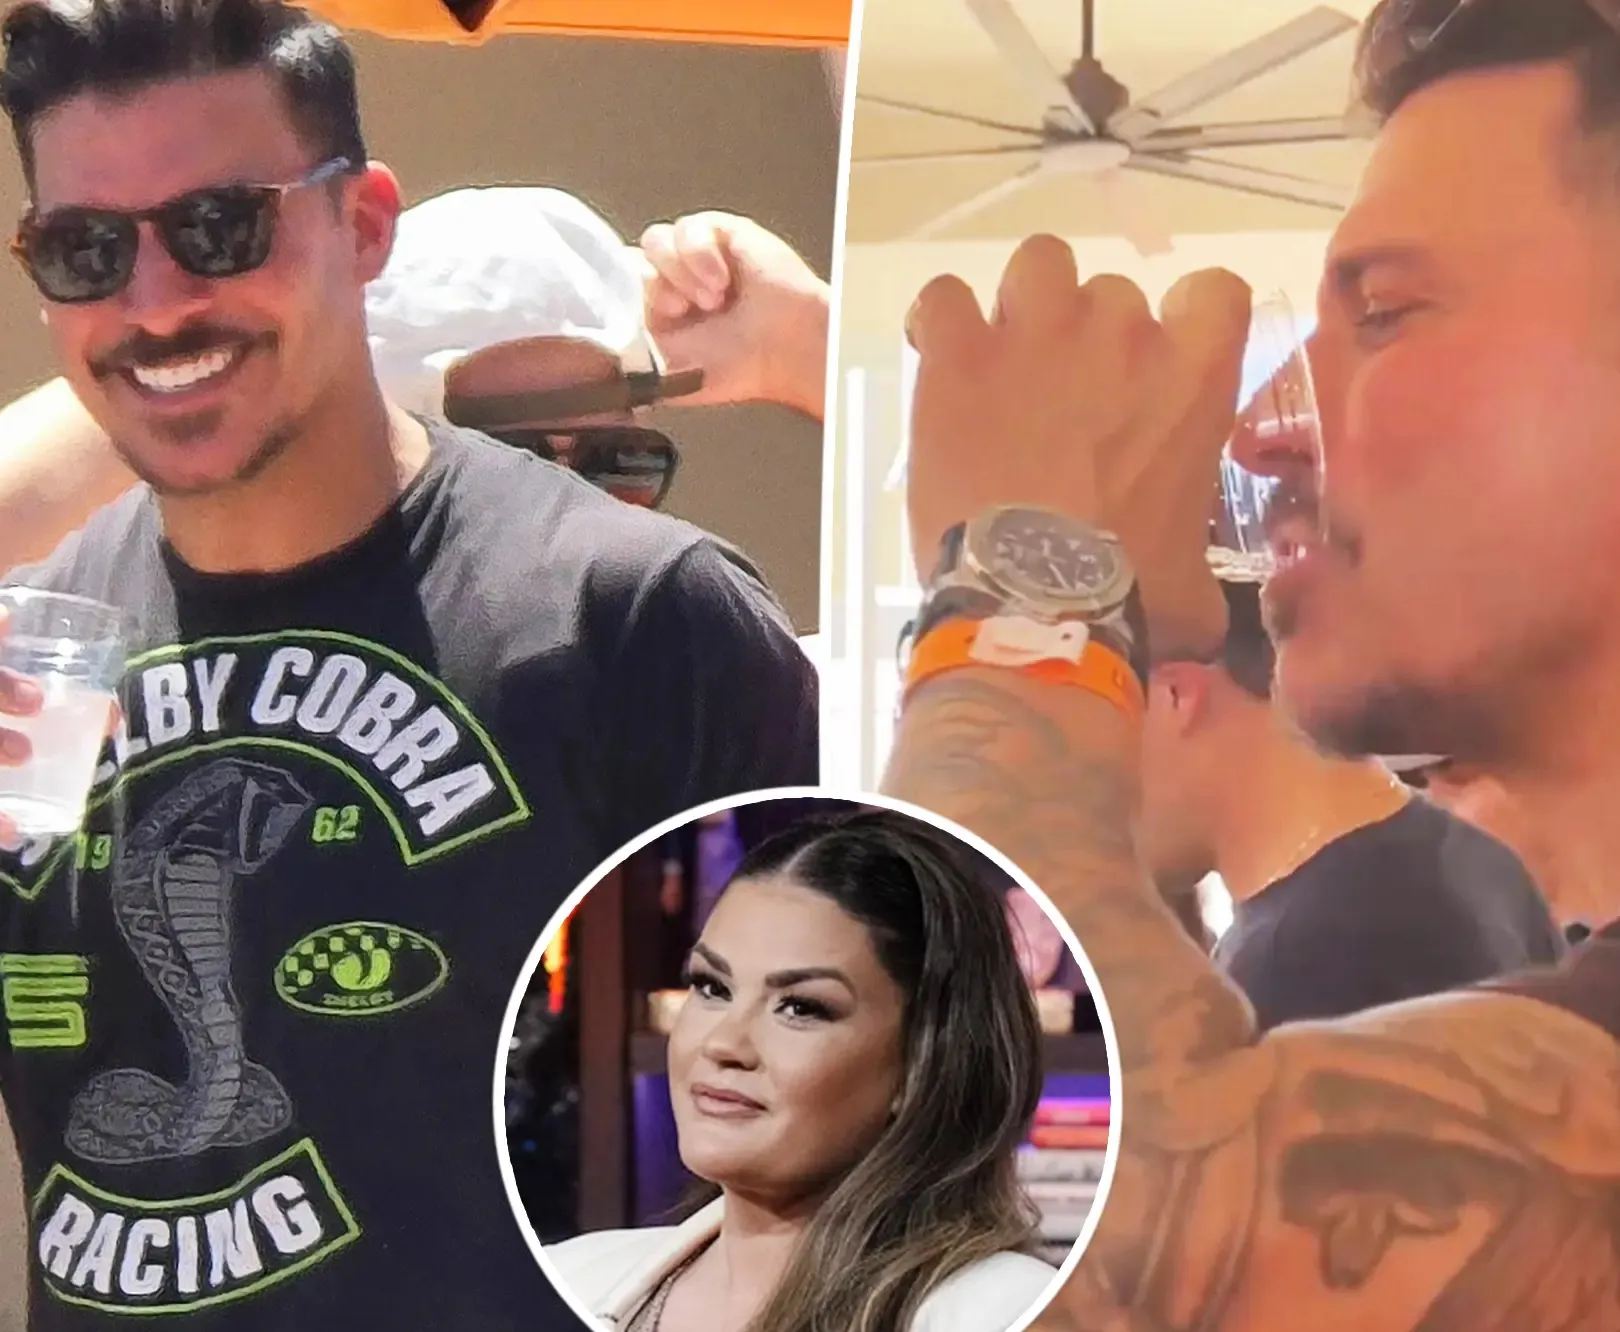 Jax Taylor parties in Las Vegas, throws back shots after claiming he’s ‘working things out’ with Brittany Cartwright